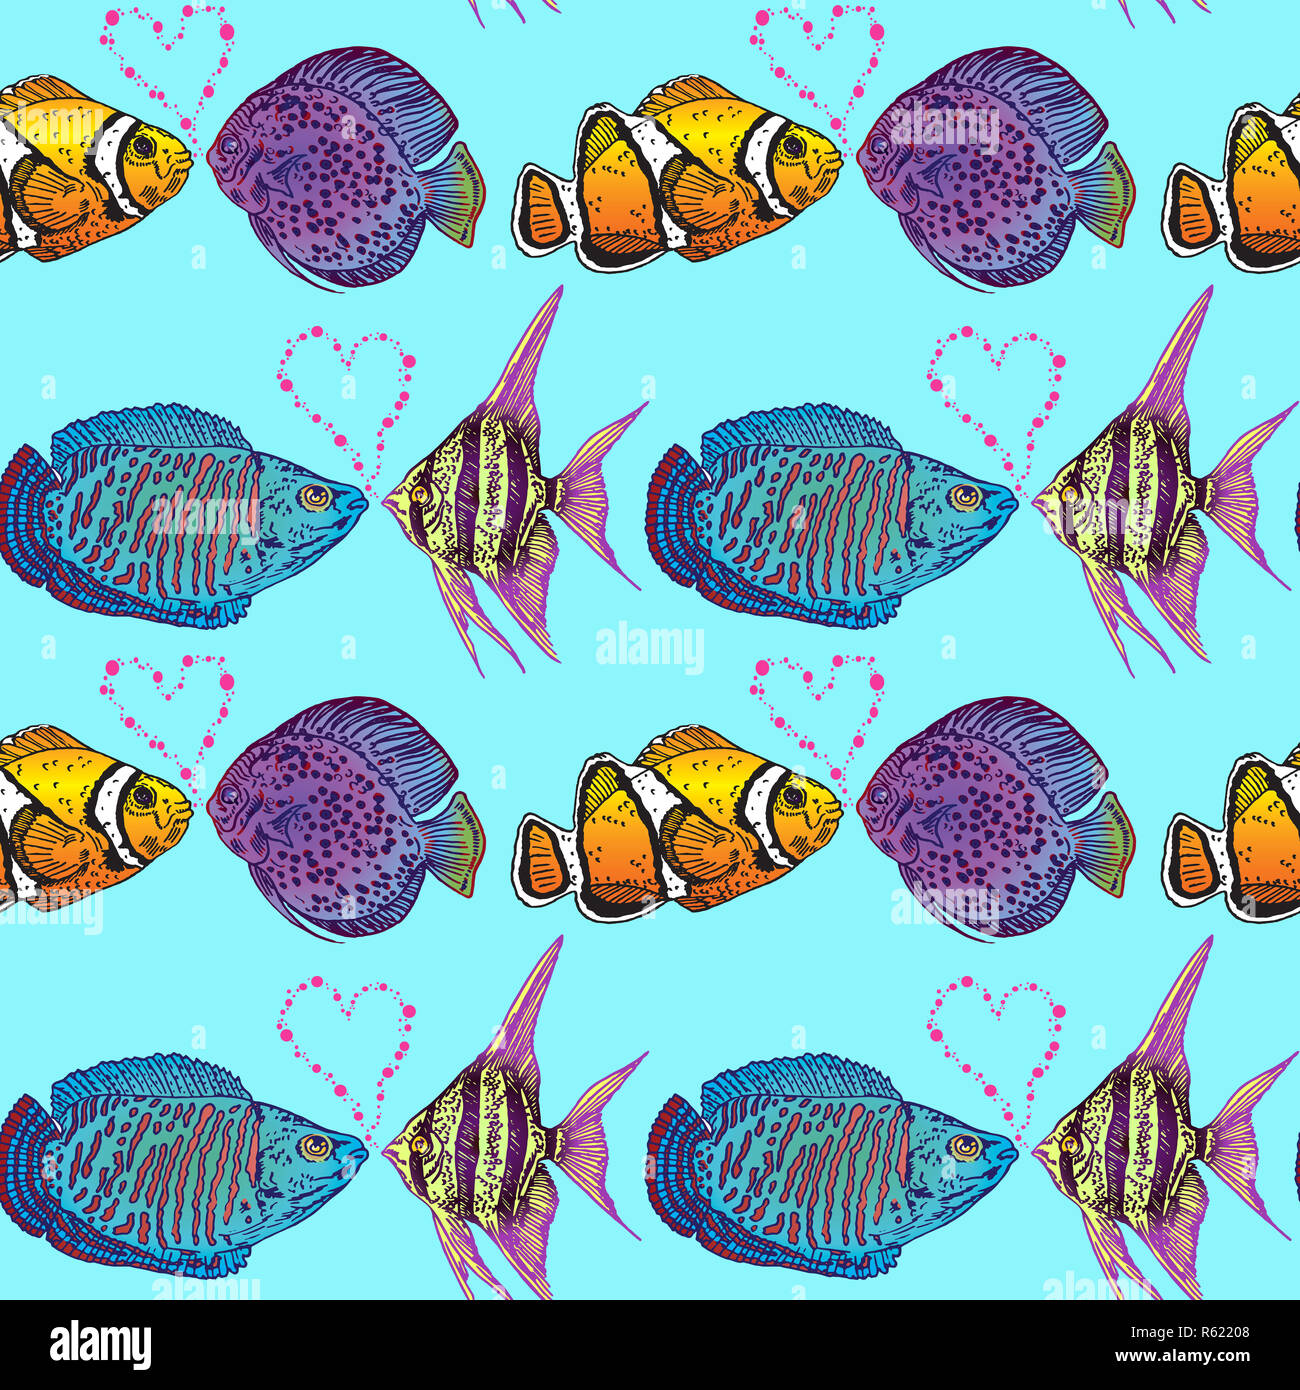 Clownfish and Leopard Snakeskin Discus, Angelfish and Dwarf gourami in love, pink bubbles in heart shape, seamless pattern design, hand drawn doodle Stock Photo